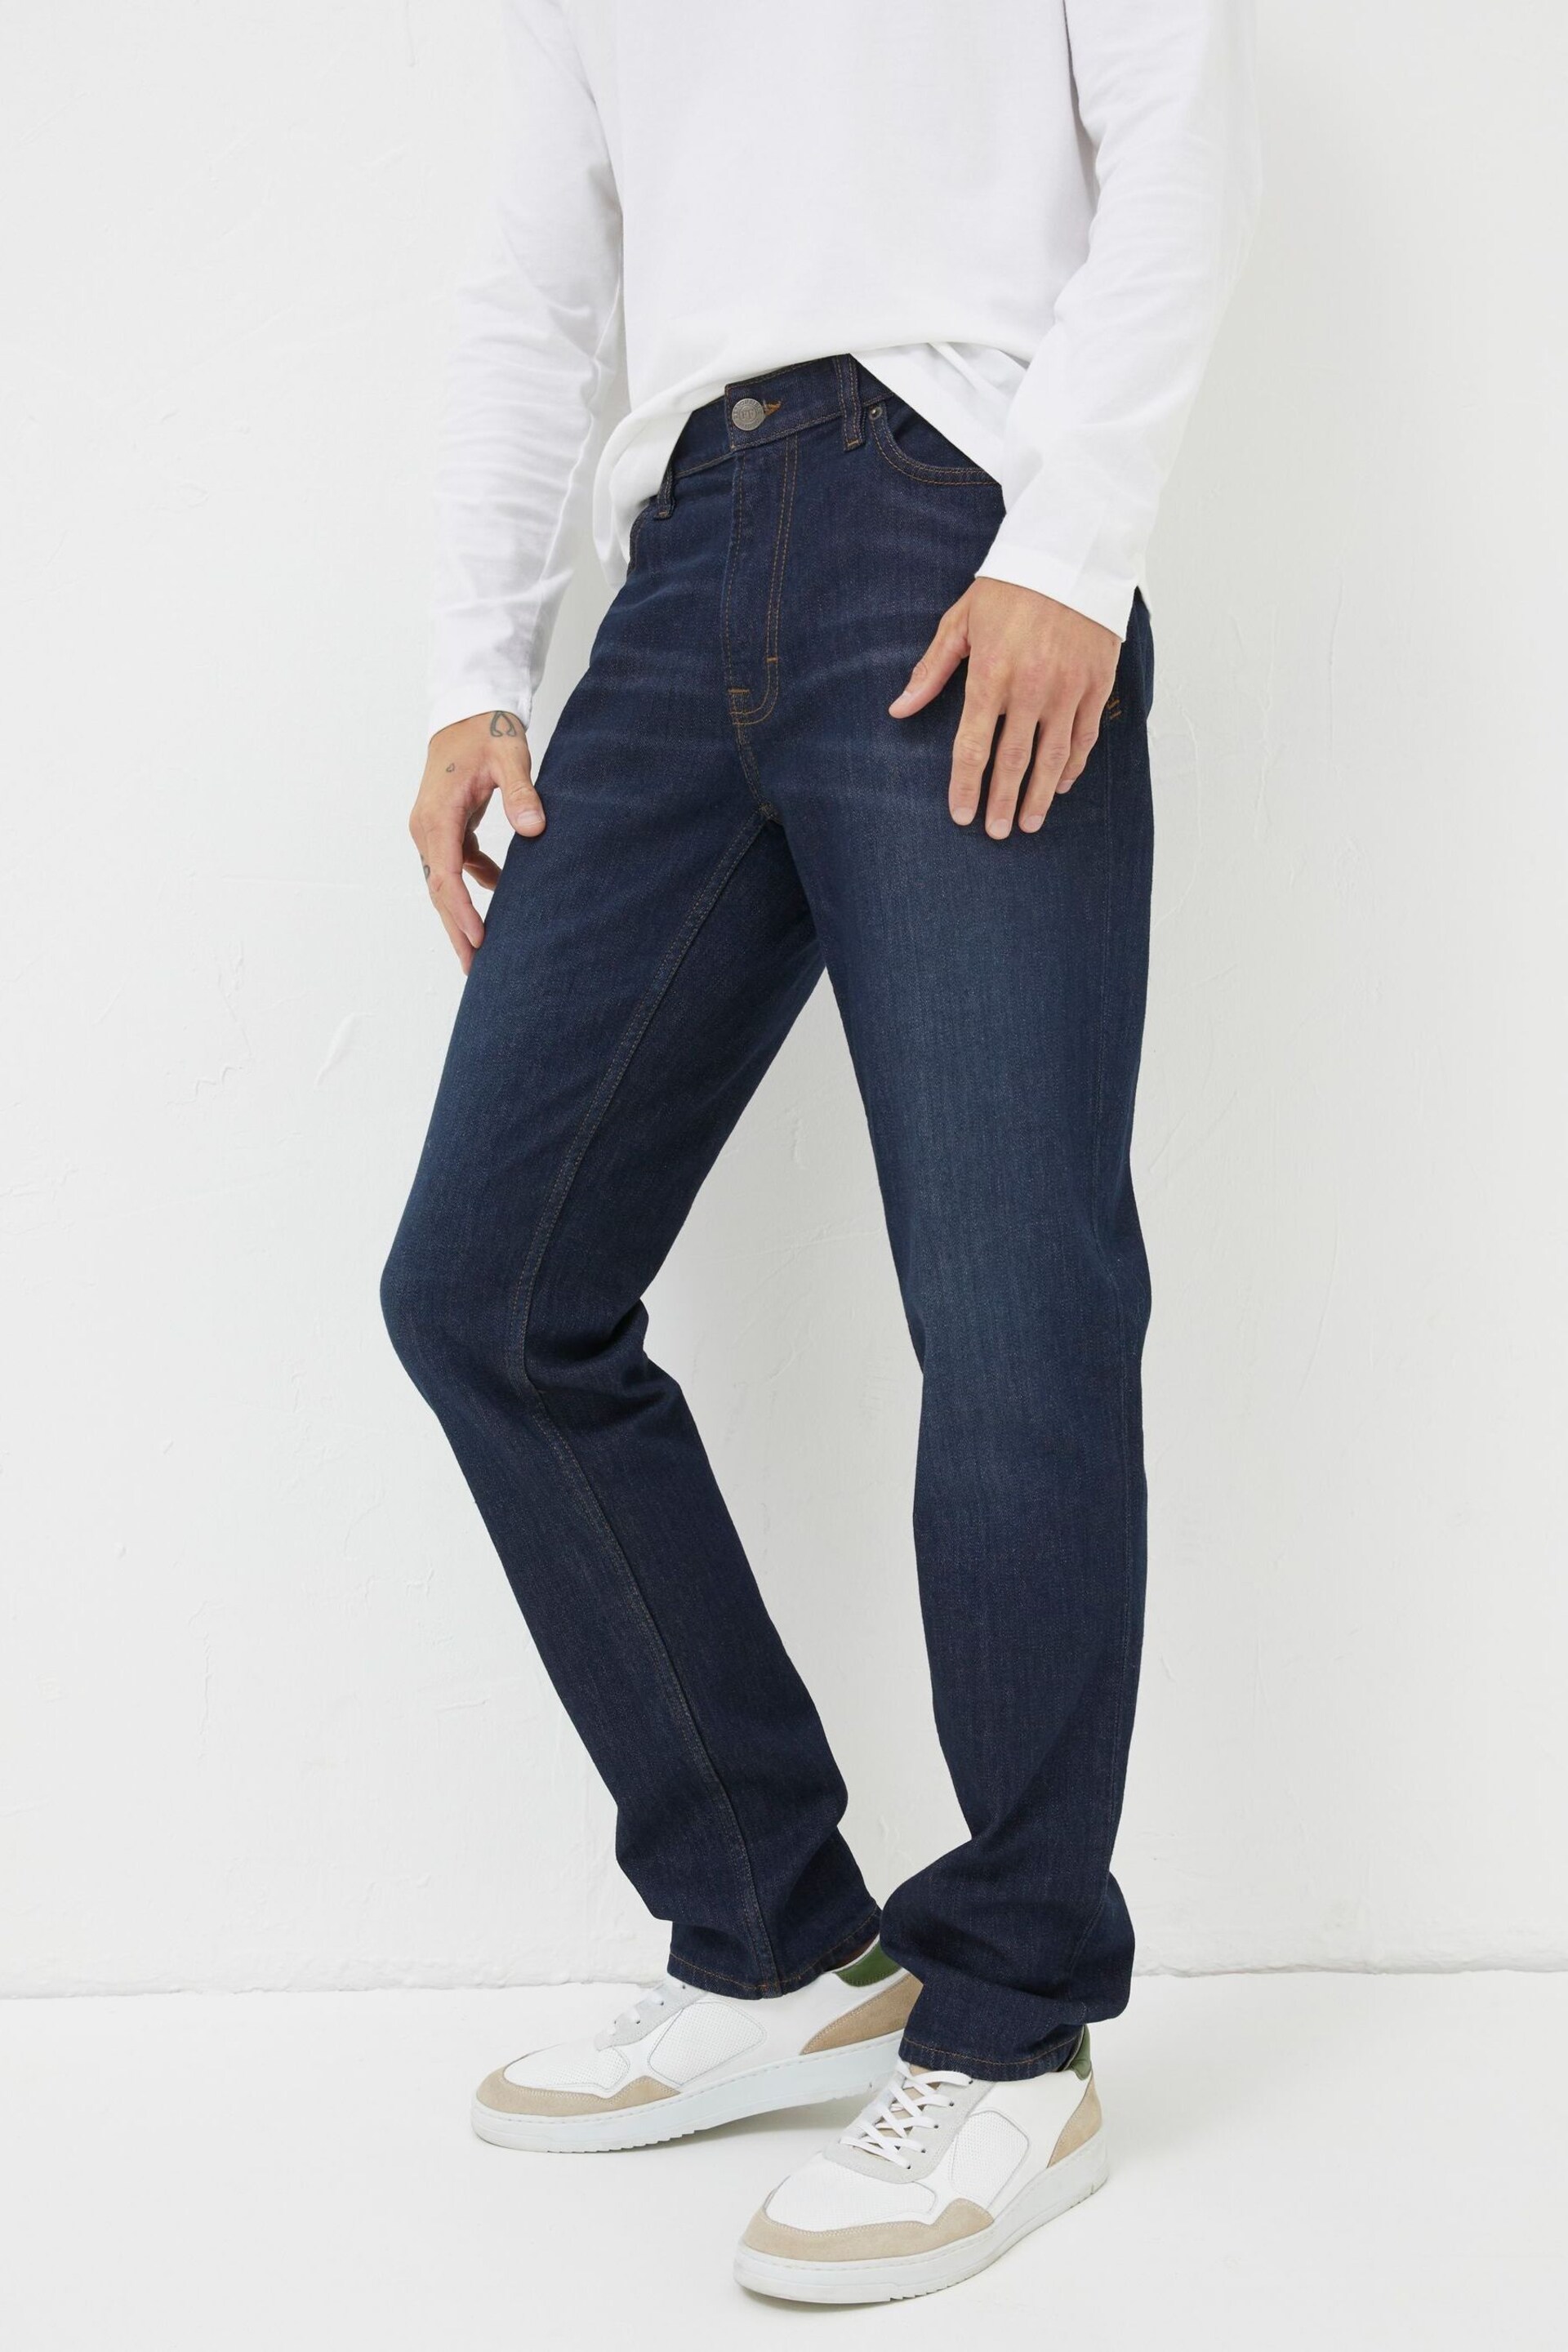 FatFace Black Slim Fit Jeans - Image 1 of 4